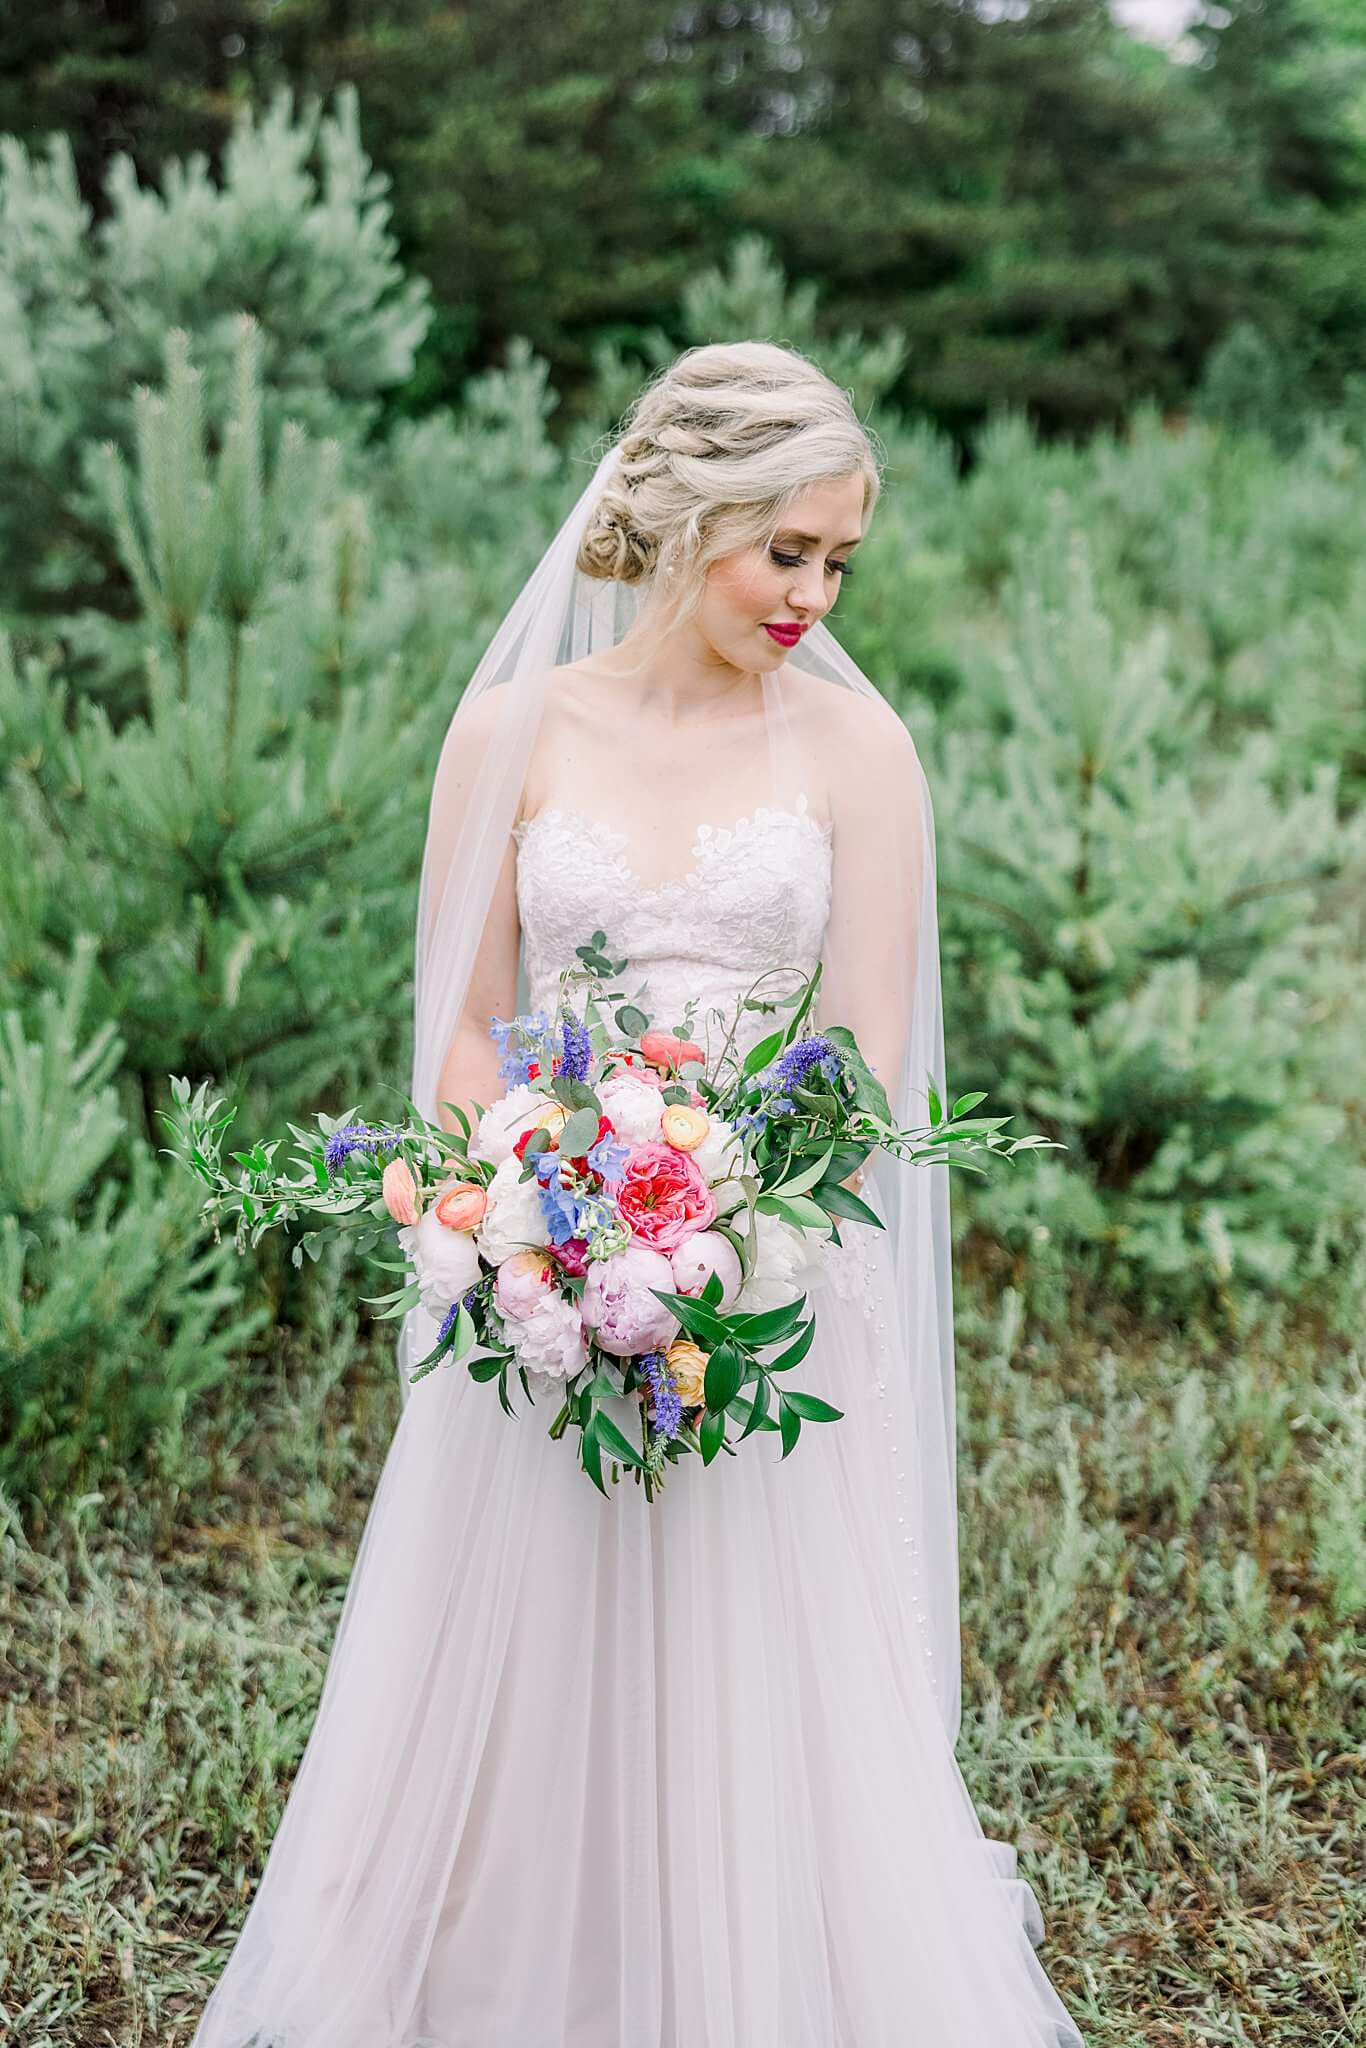 Sweet, romantic bride poses in front of evergreen trees with a bright, colorful bouquet on her Traverse City wedding daya.